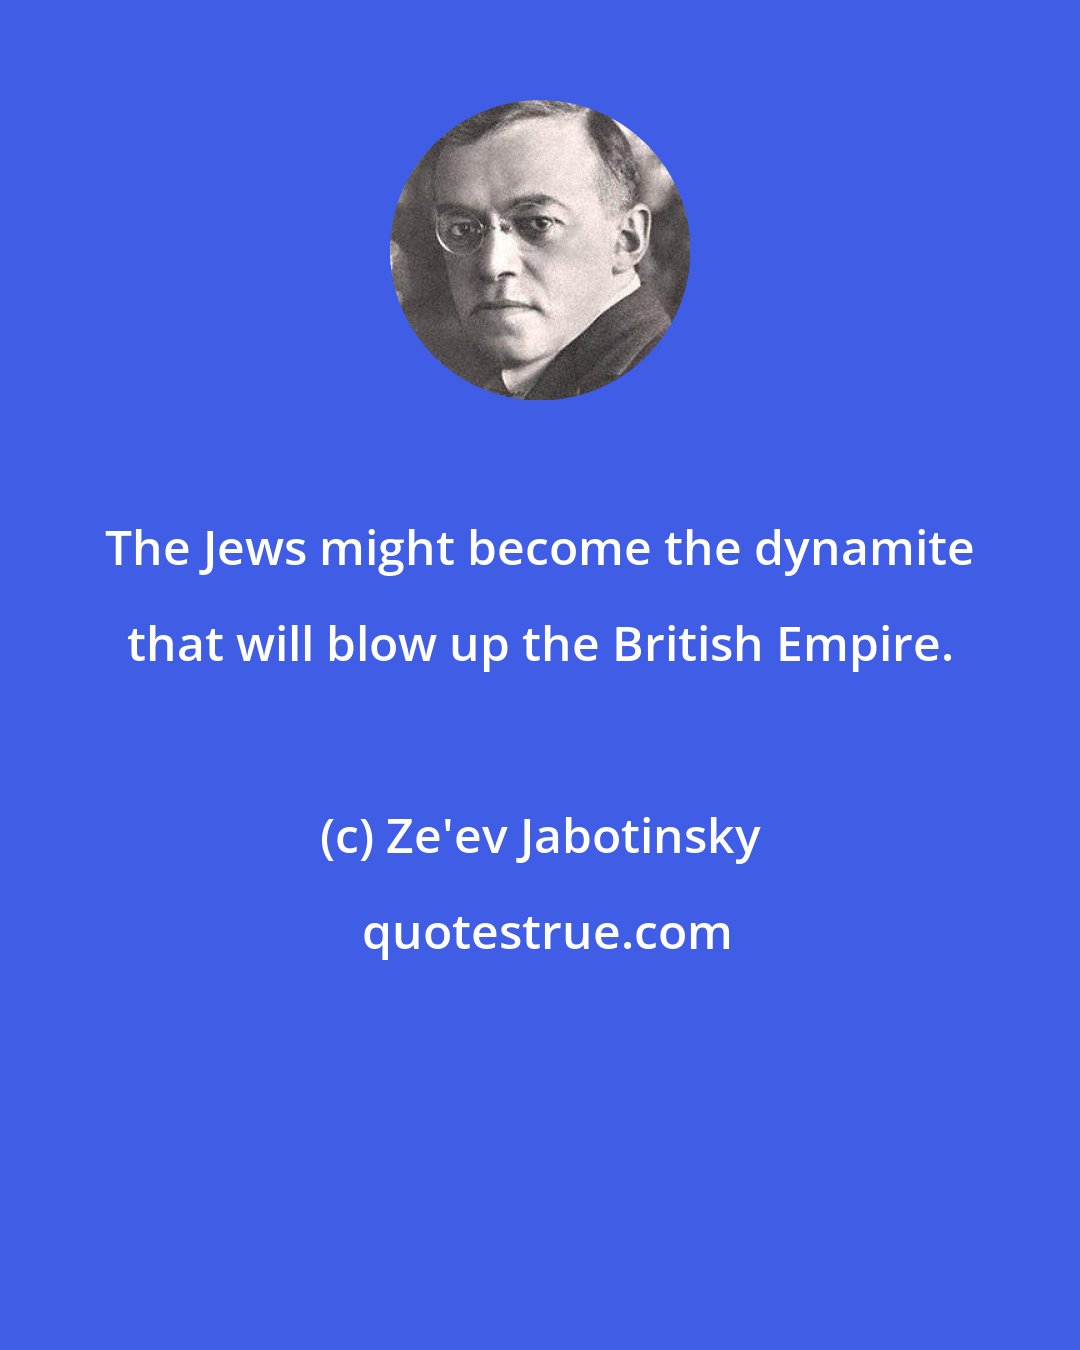 Ze'ev Jabotinsky: The Jews might become the dynamite that will blow up the British Empire.